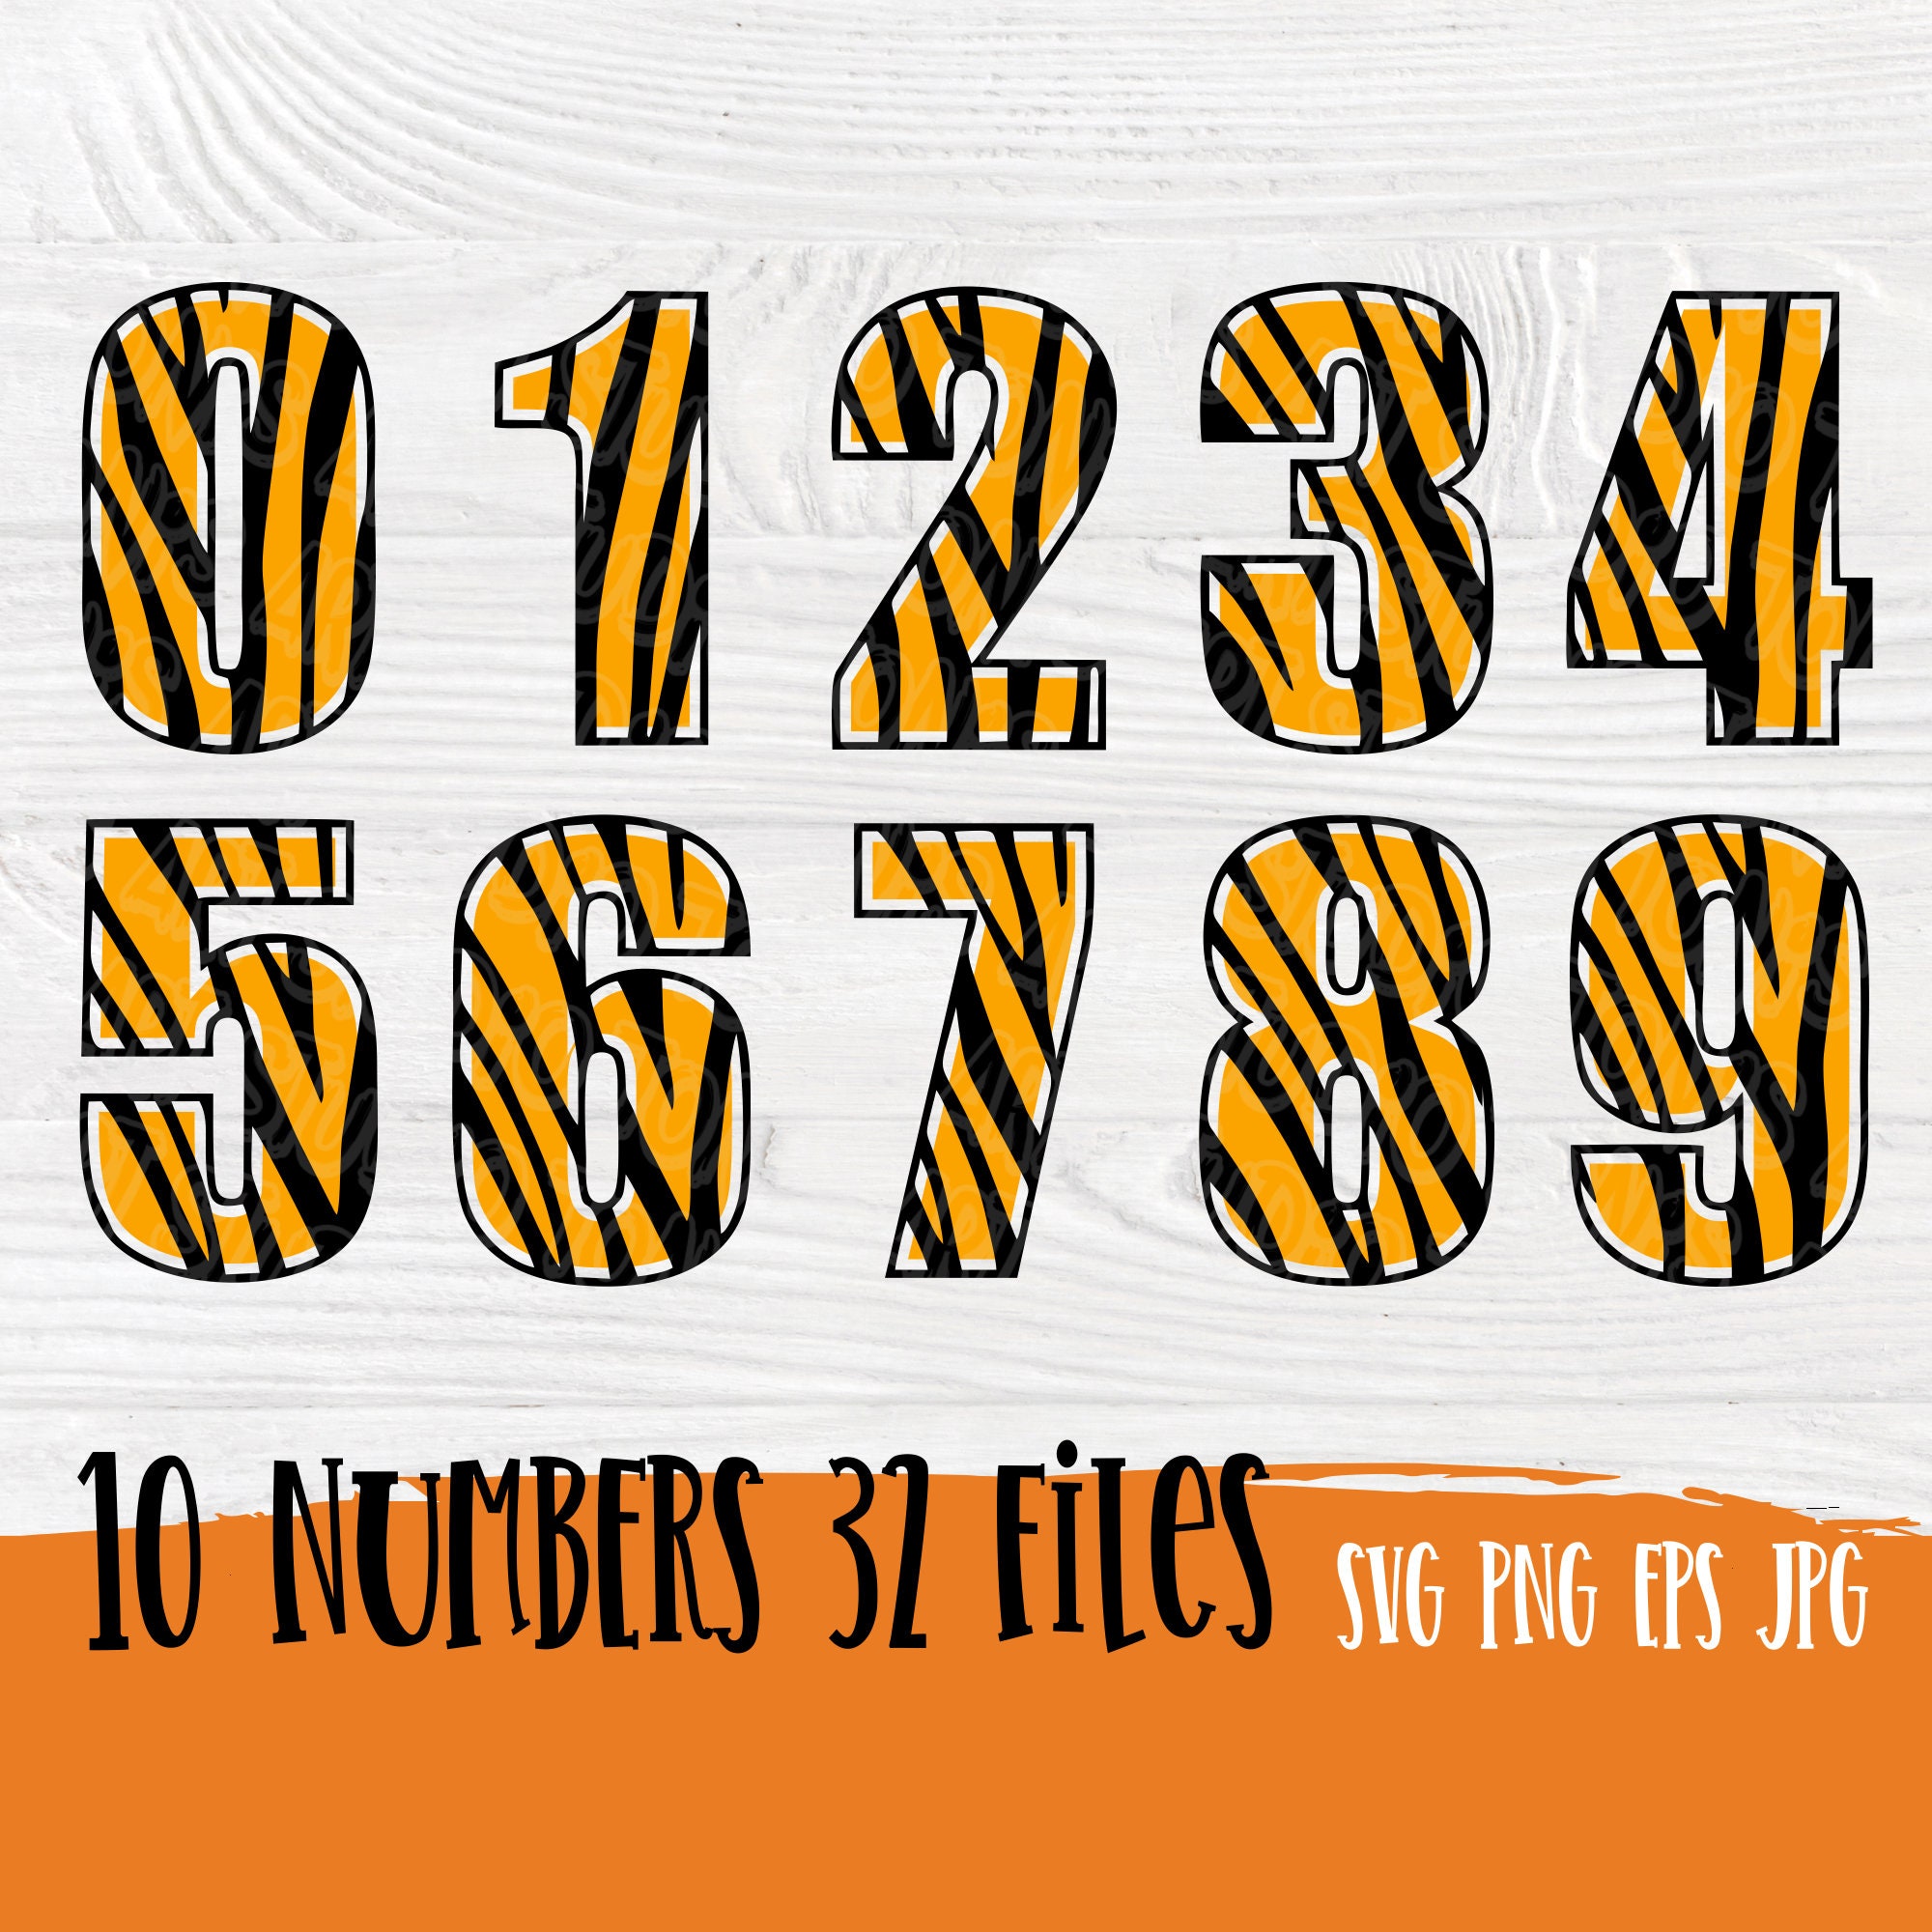 Numbers SVG | Zebra numbers | Number svg | Numbers cut files | Svg